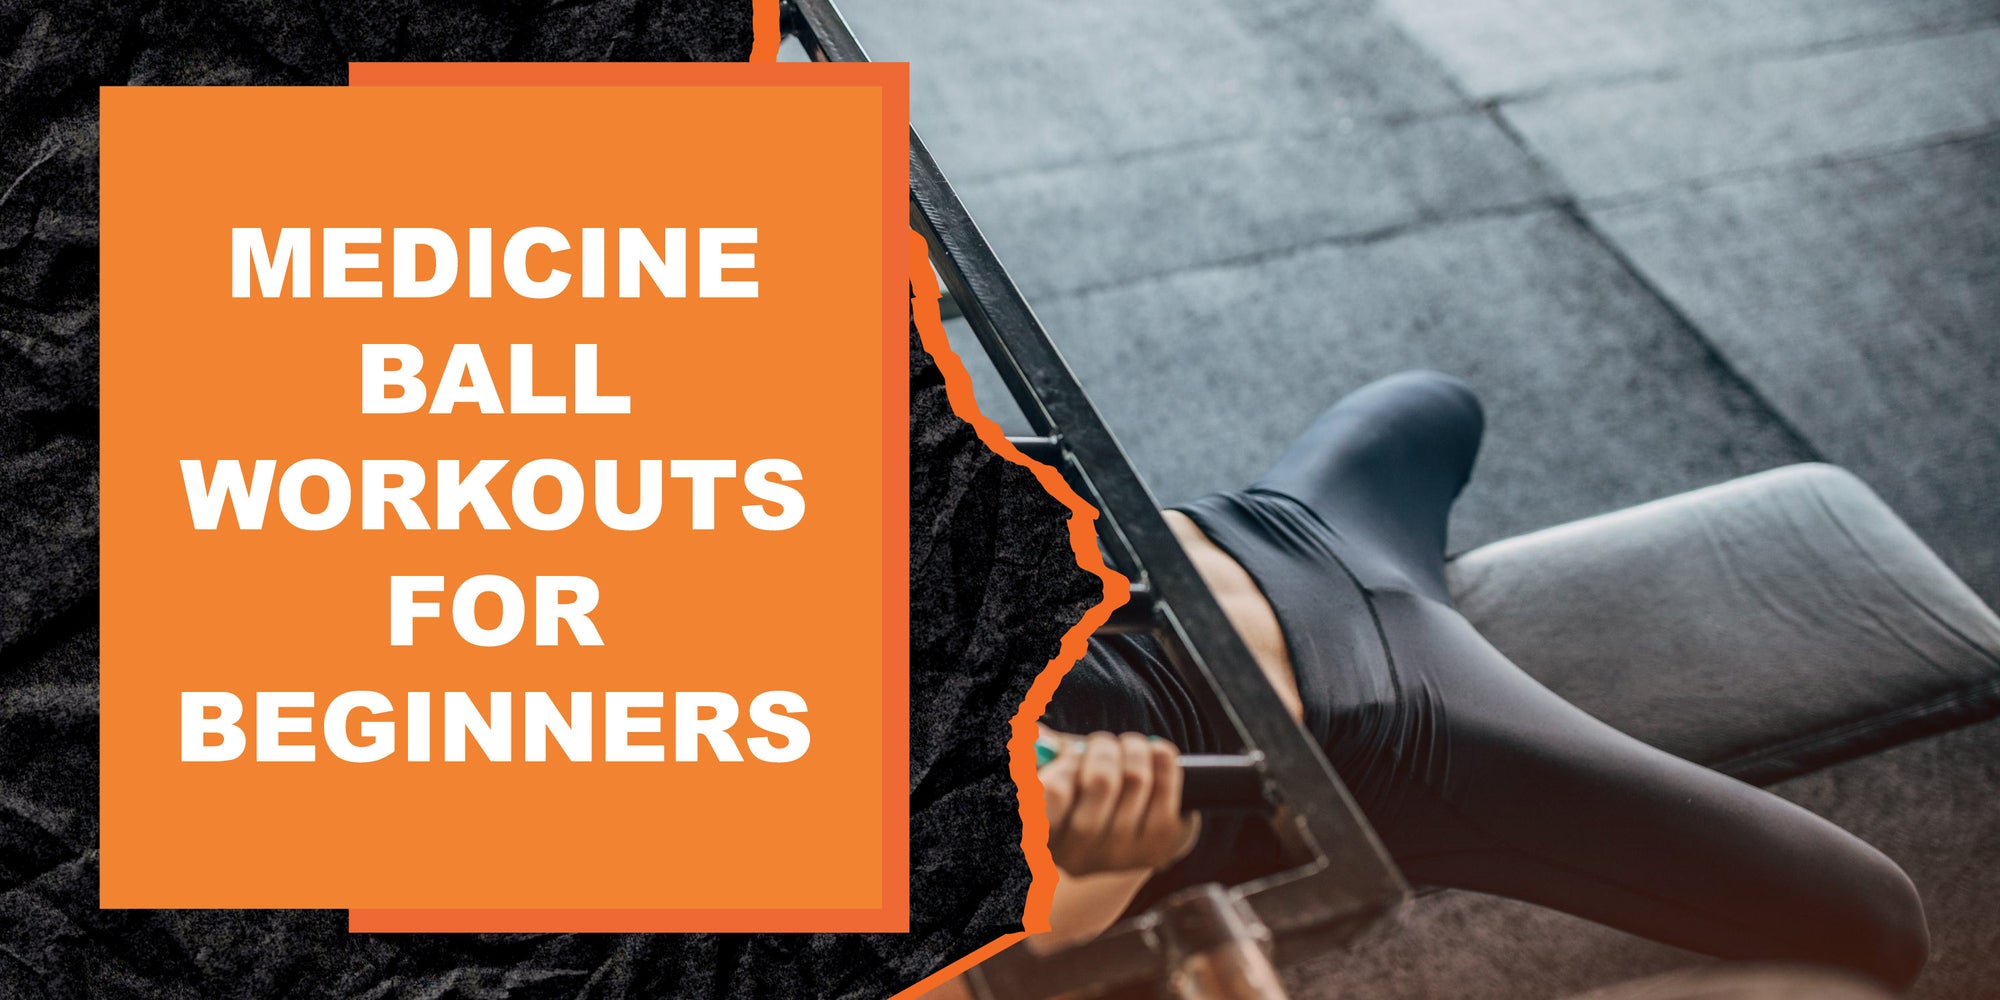 Medicine Ball Workouts for Beginners